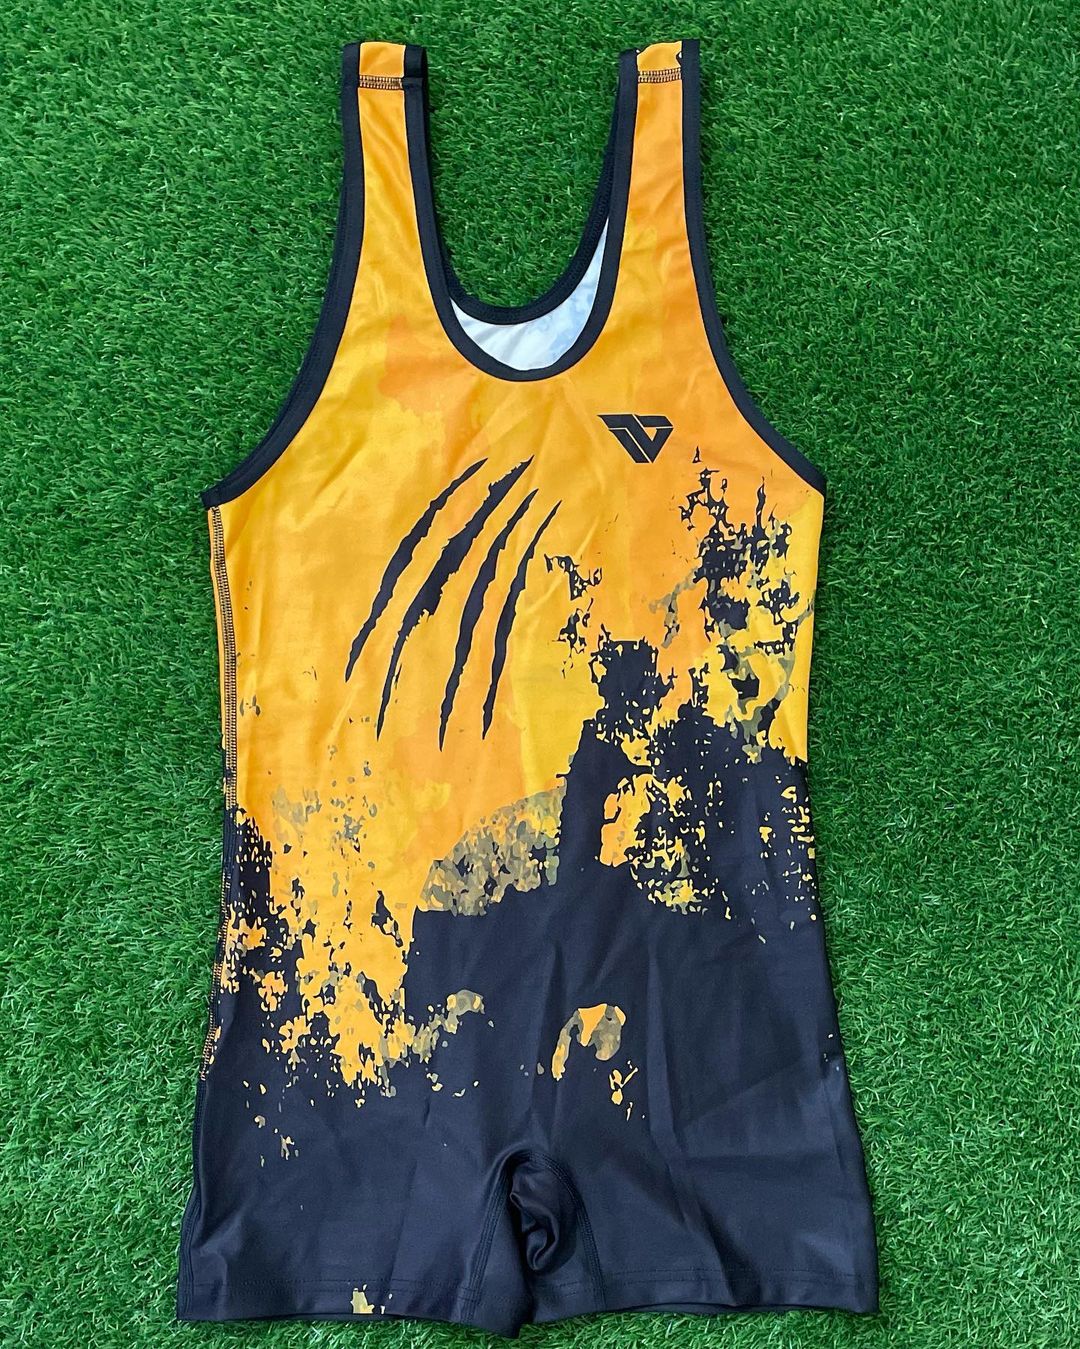 Athletic sublimation tank top displaying energetic sports patterns